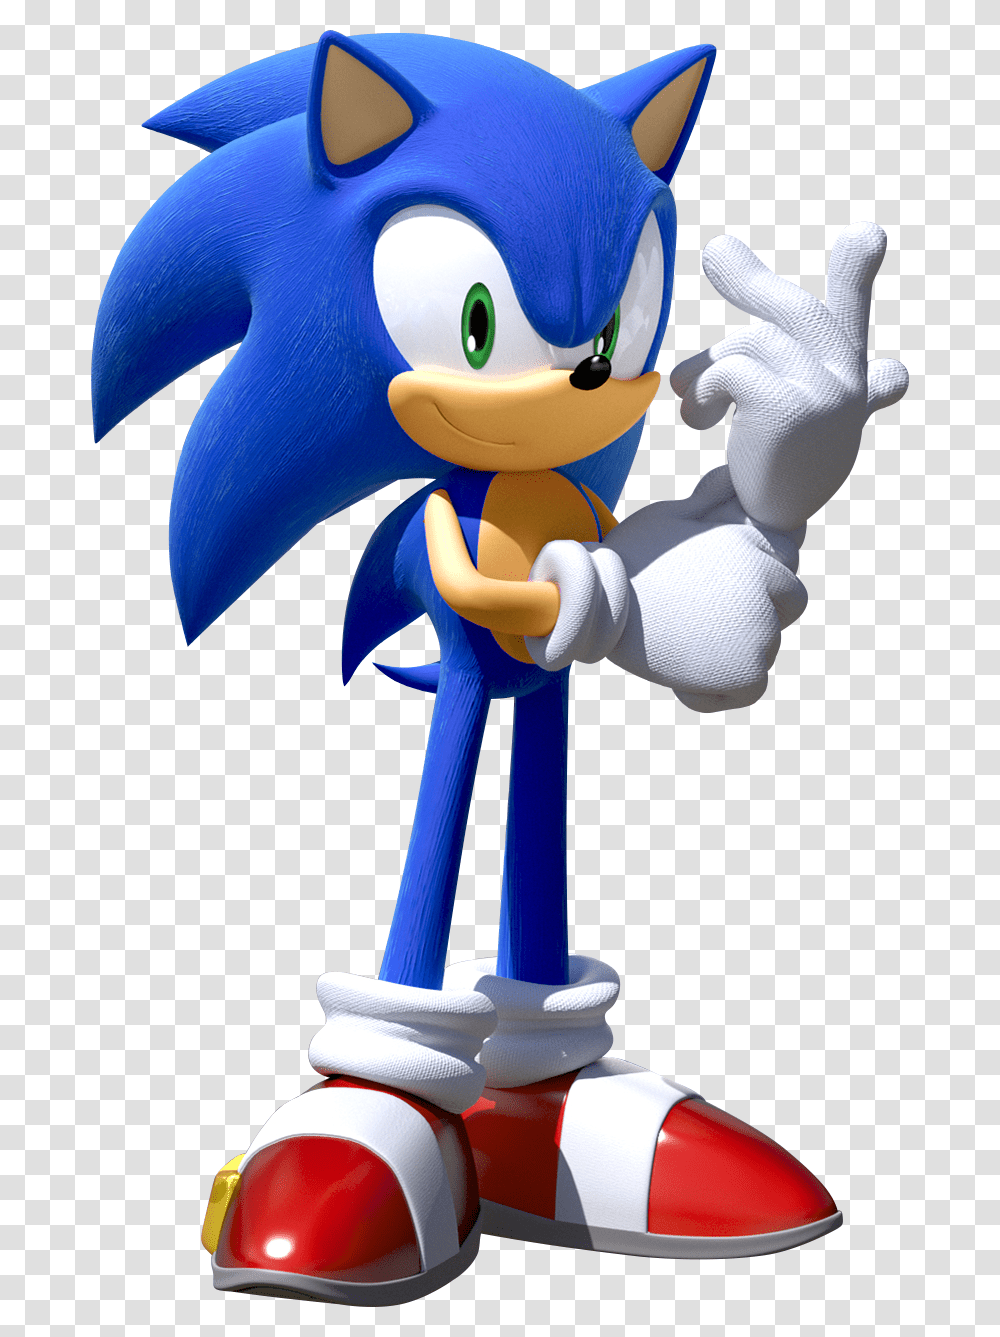 Sonic News Network Final Sonic Movie Design, Toy, Inflatable, Mascot Transparent Png